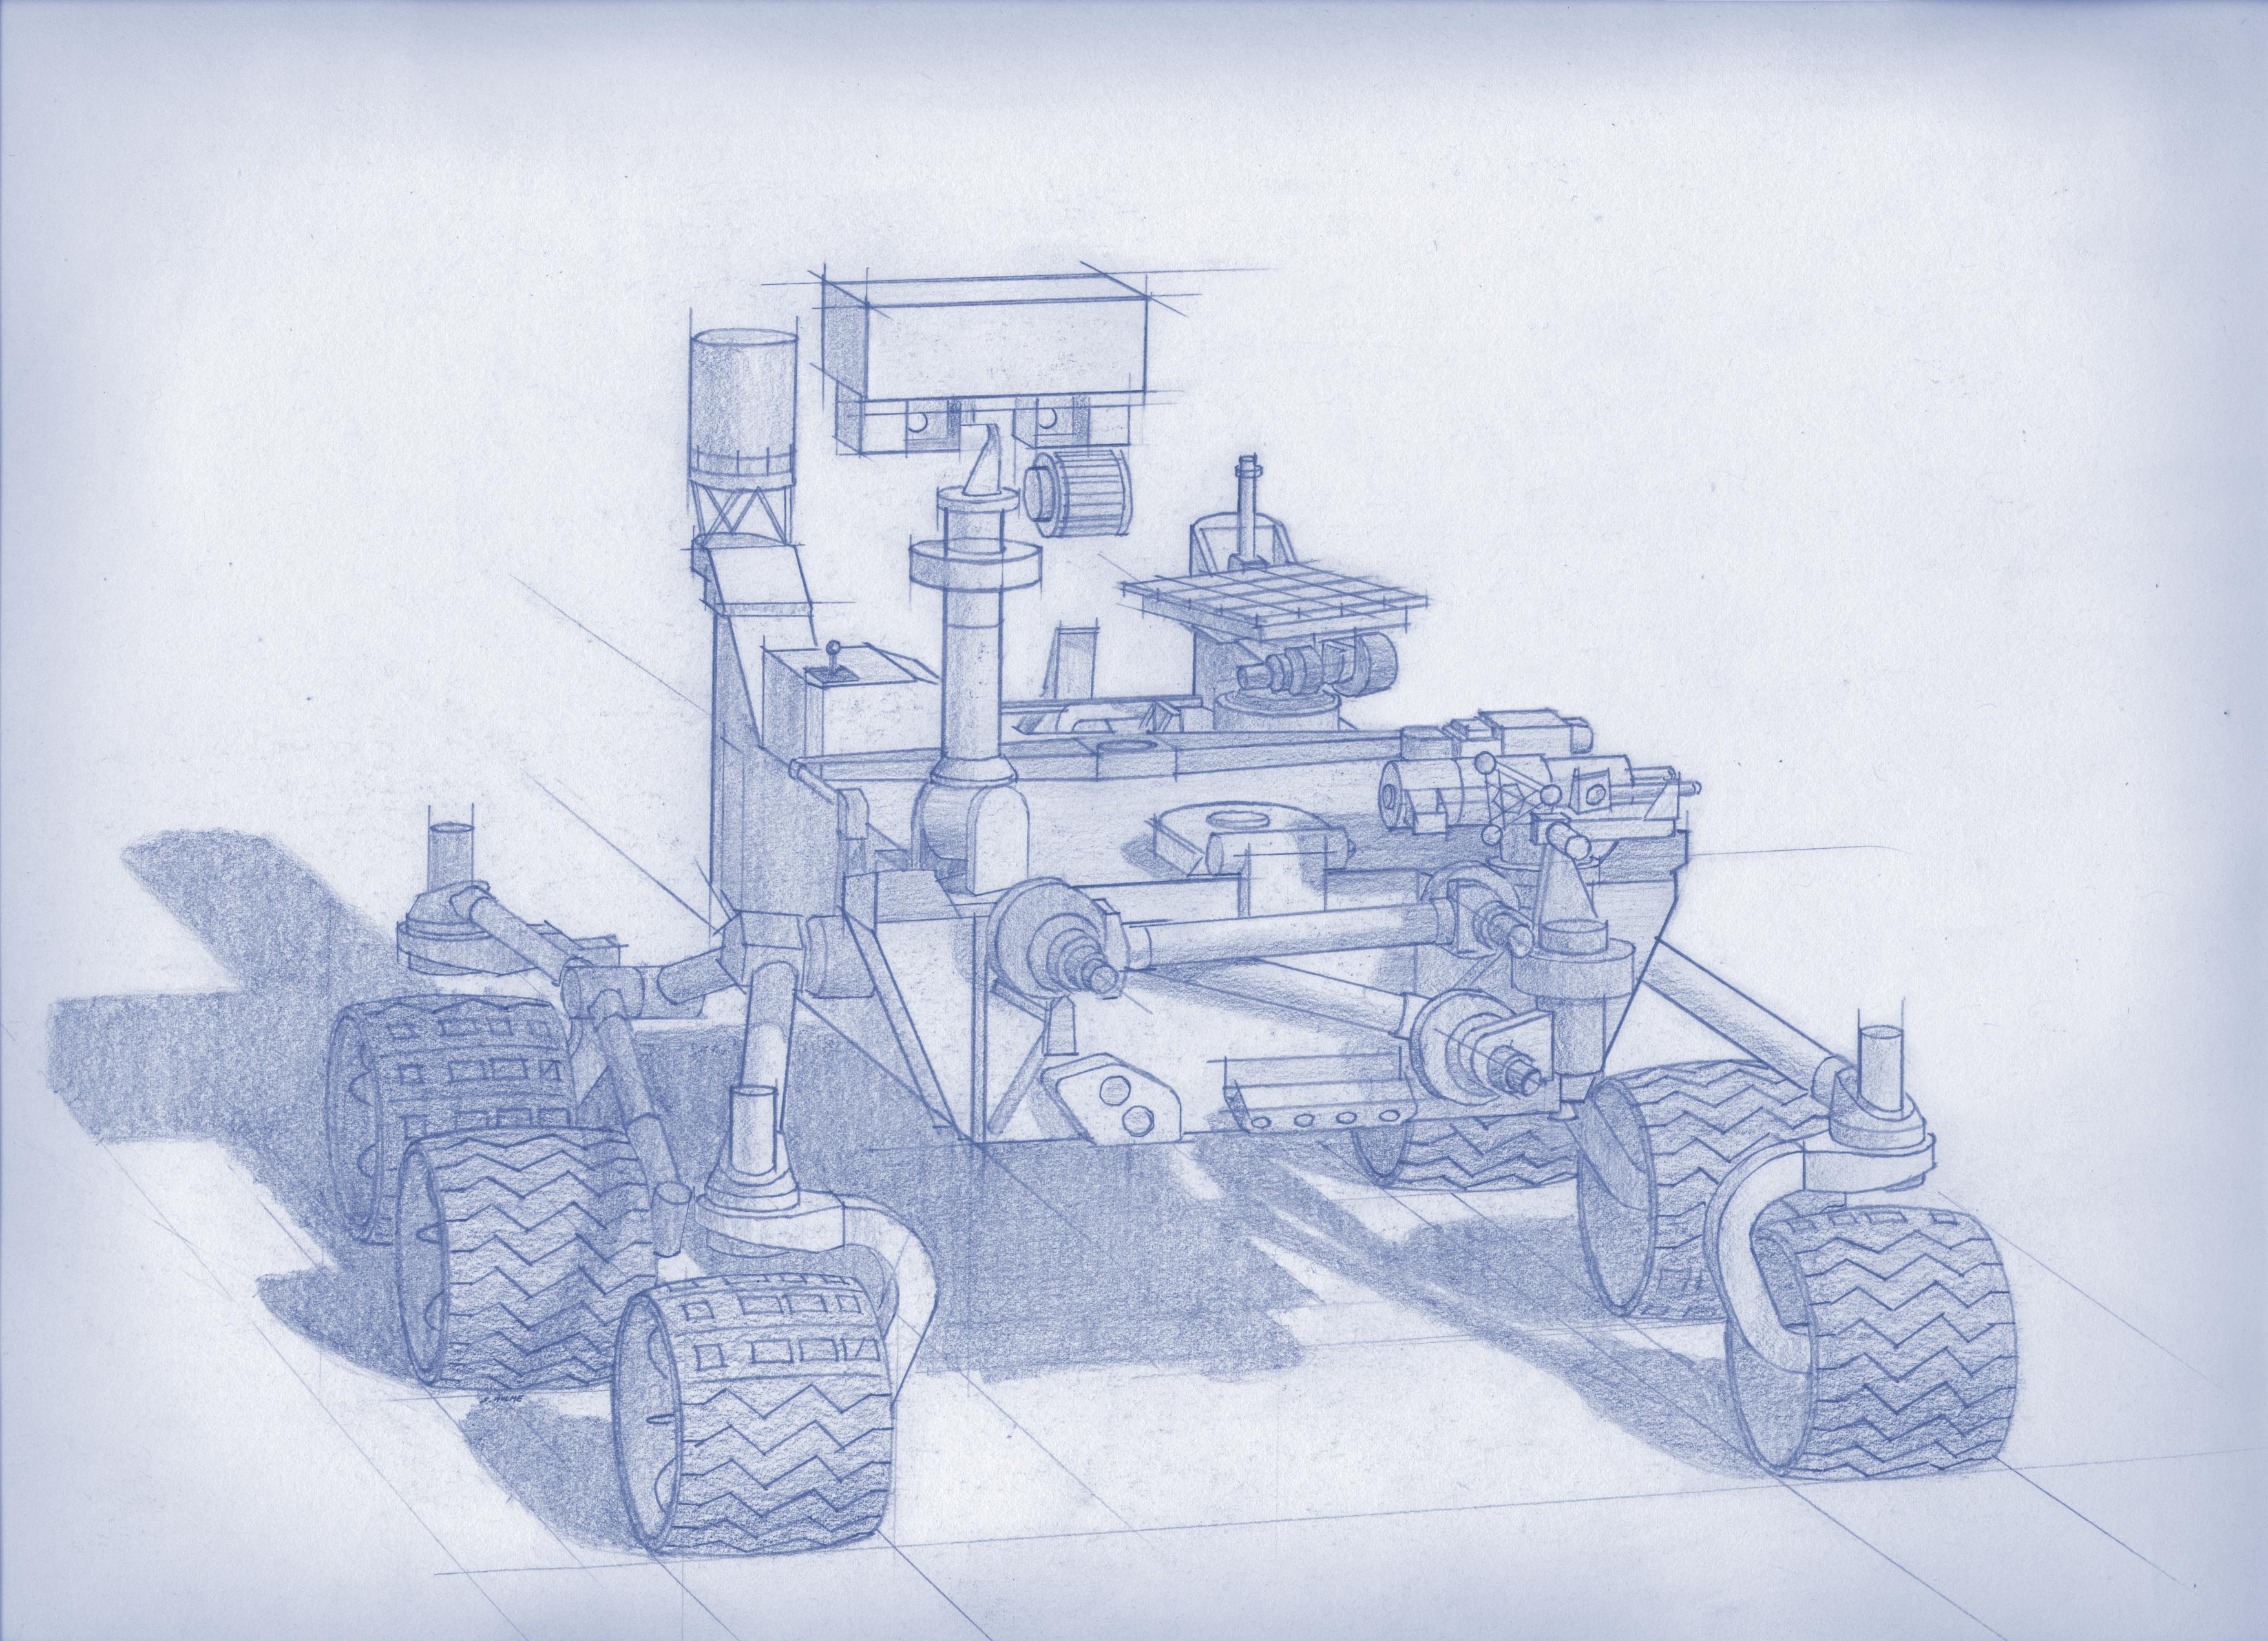 NASA image of proposed 2020 Mars rover posted on AmericaSpace